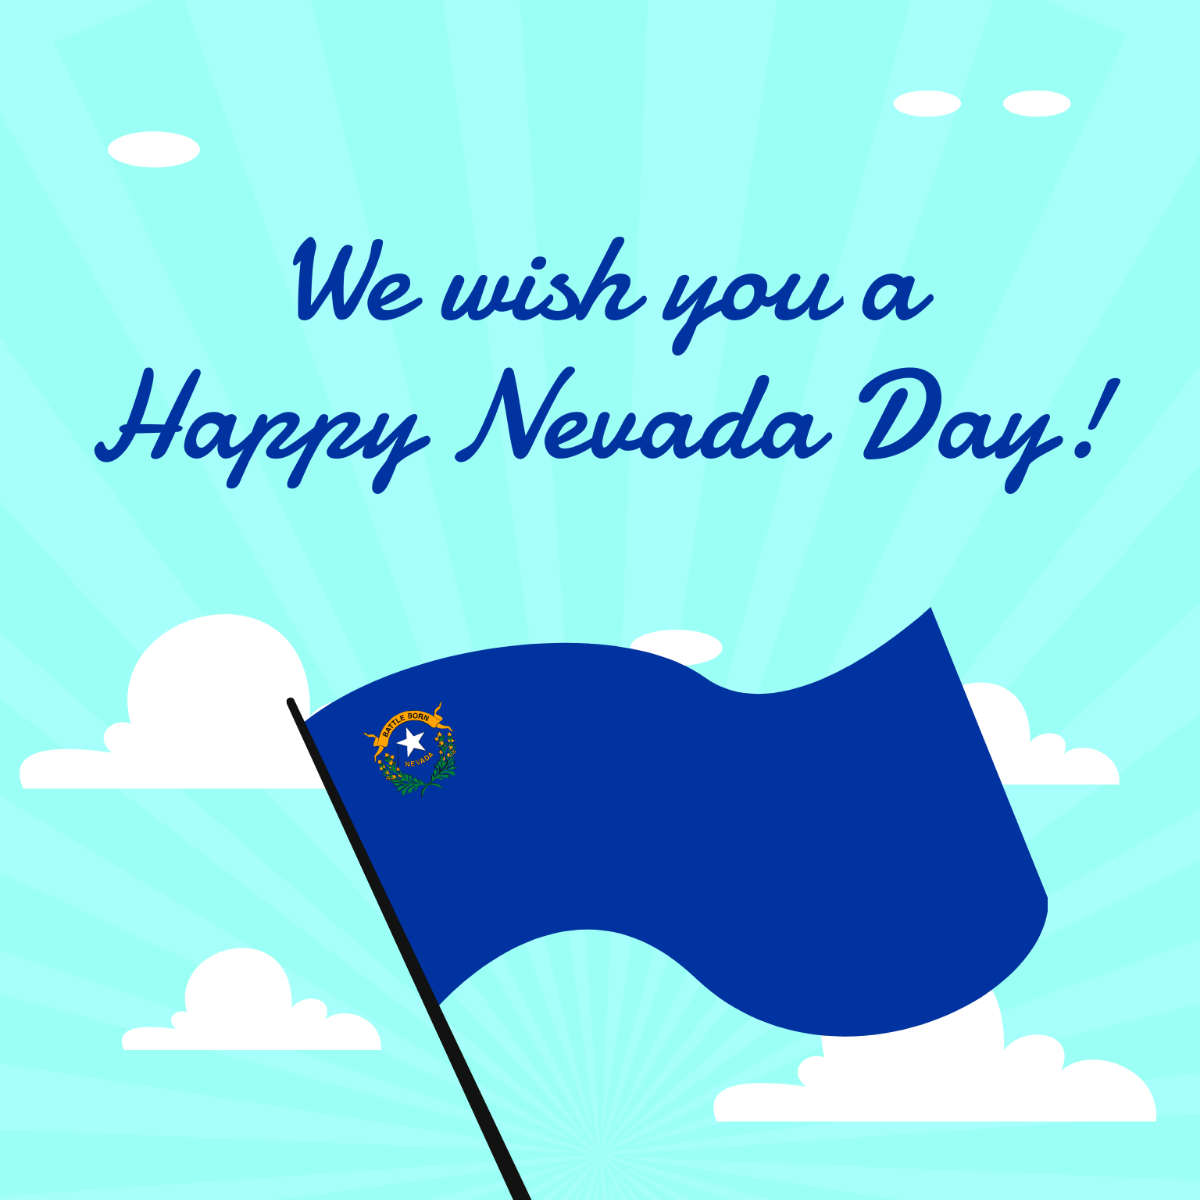 Free Nevada Day Wishes Vector Template